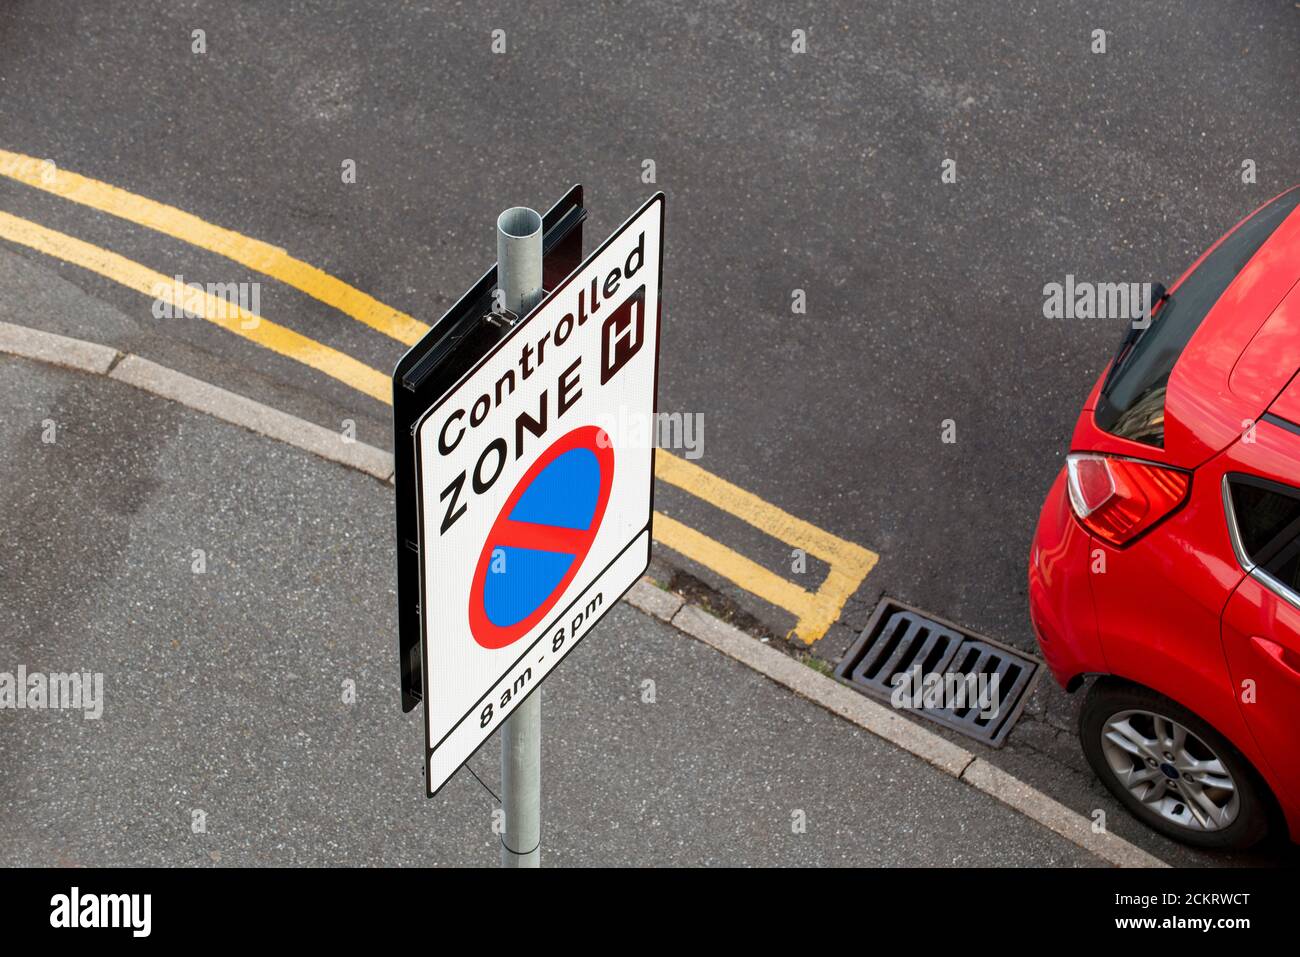 Thanet, Kent, England, UK. 2020. Roadsign for a controlled zone, no parking between 8am and 8pm. No waiting and double yellow lines. Stock Photo